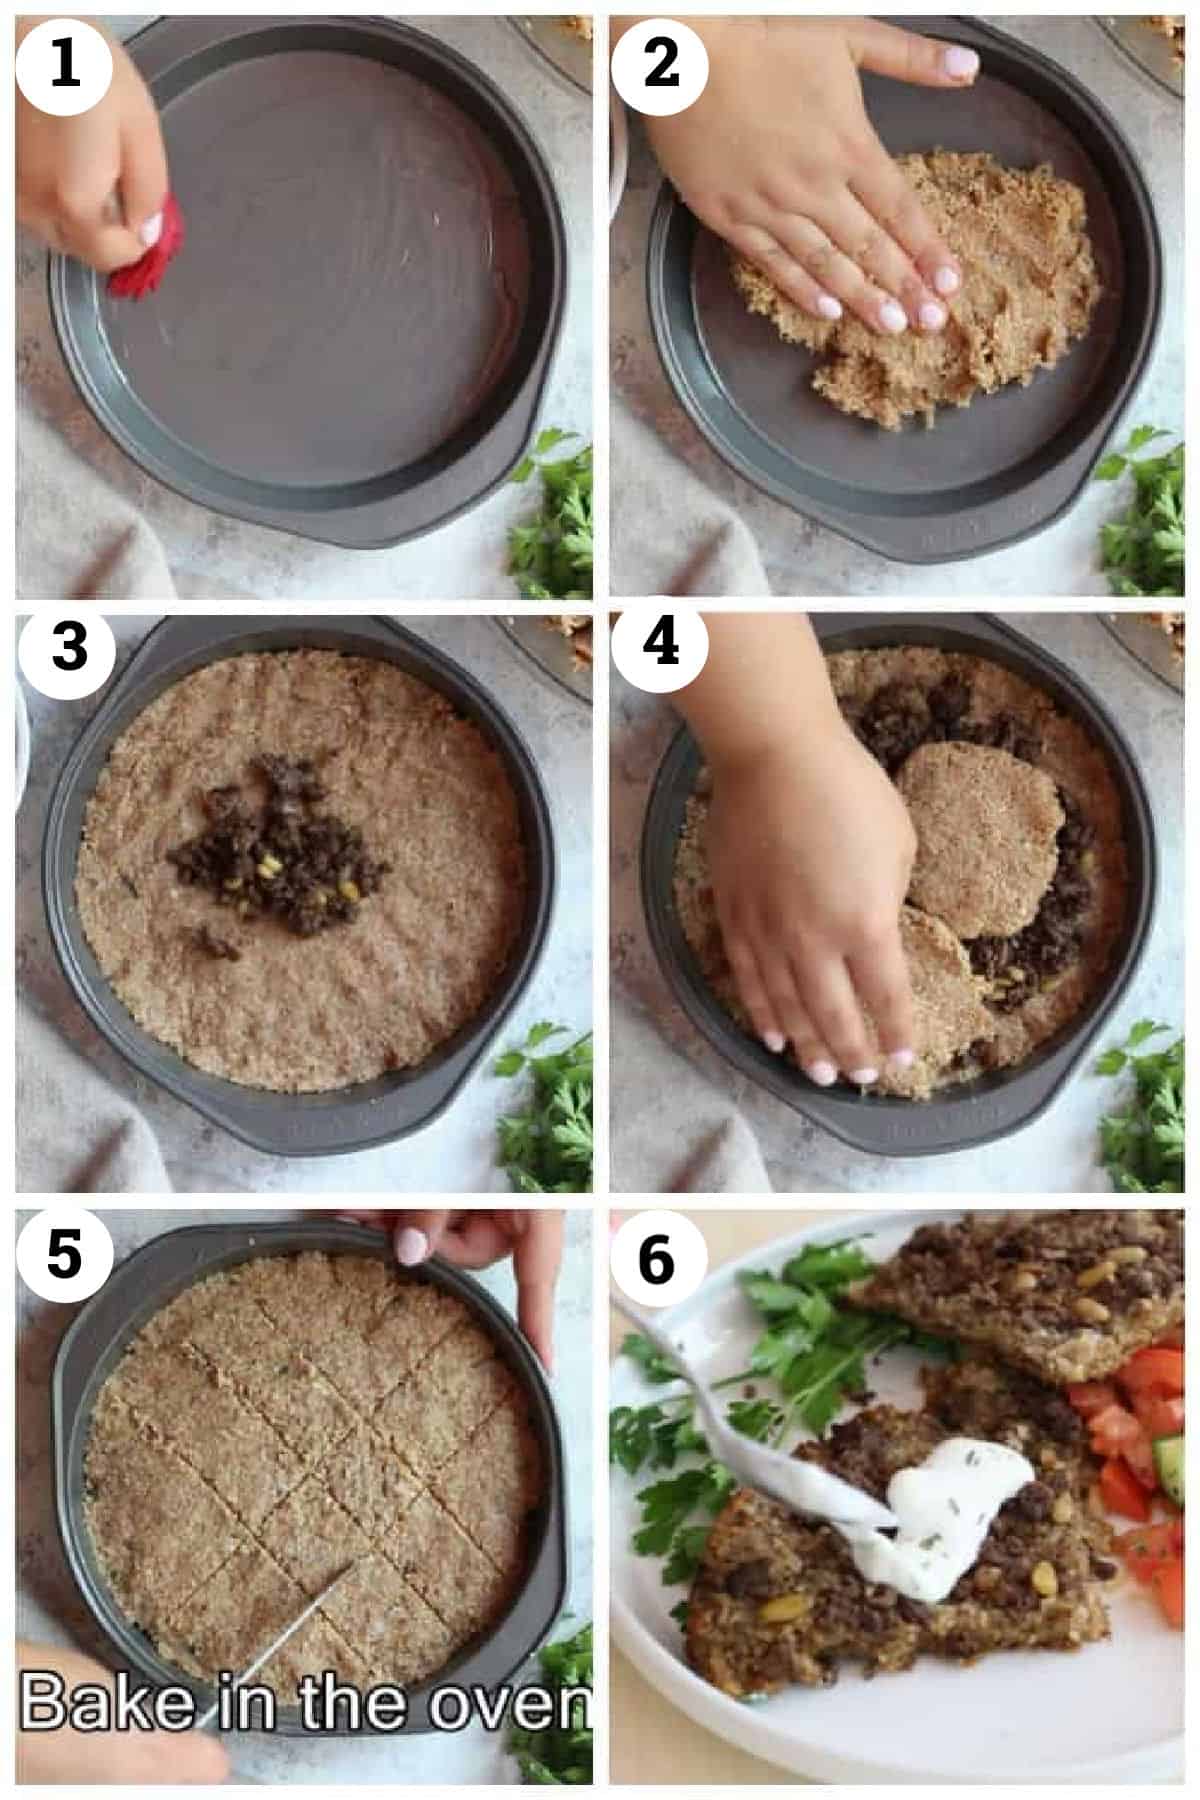 To make baked kibbeh, Coat the bottom of the pan with vegetable oil then spread some of the dough. Top with the filling and spread some more dough. Cut into diamonds and bake until fully cooked. Serve with yogurt sauce. 